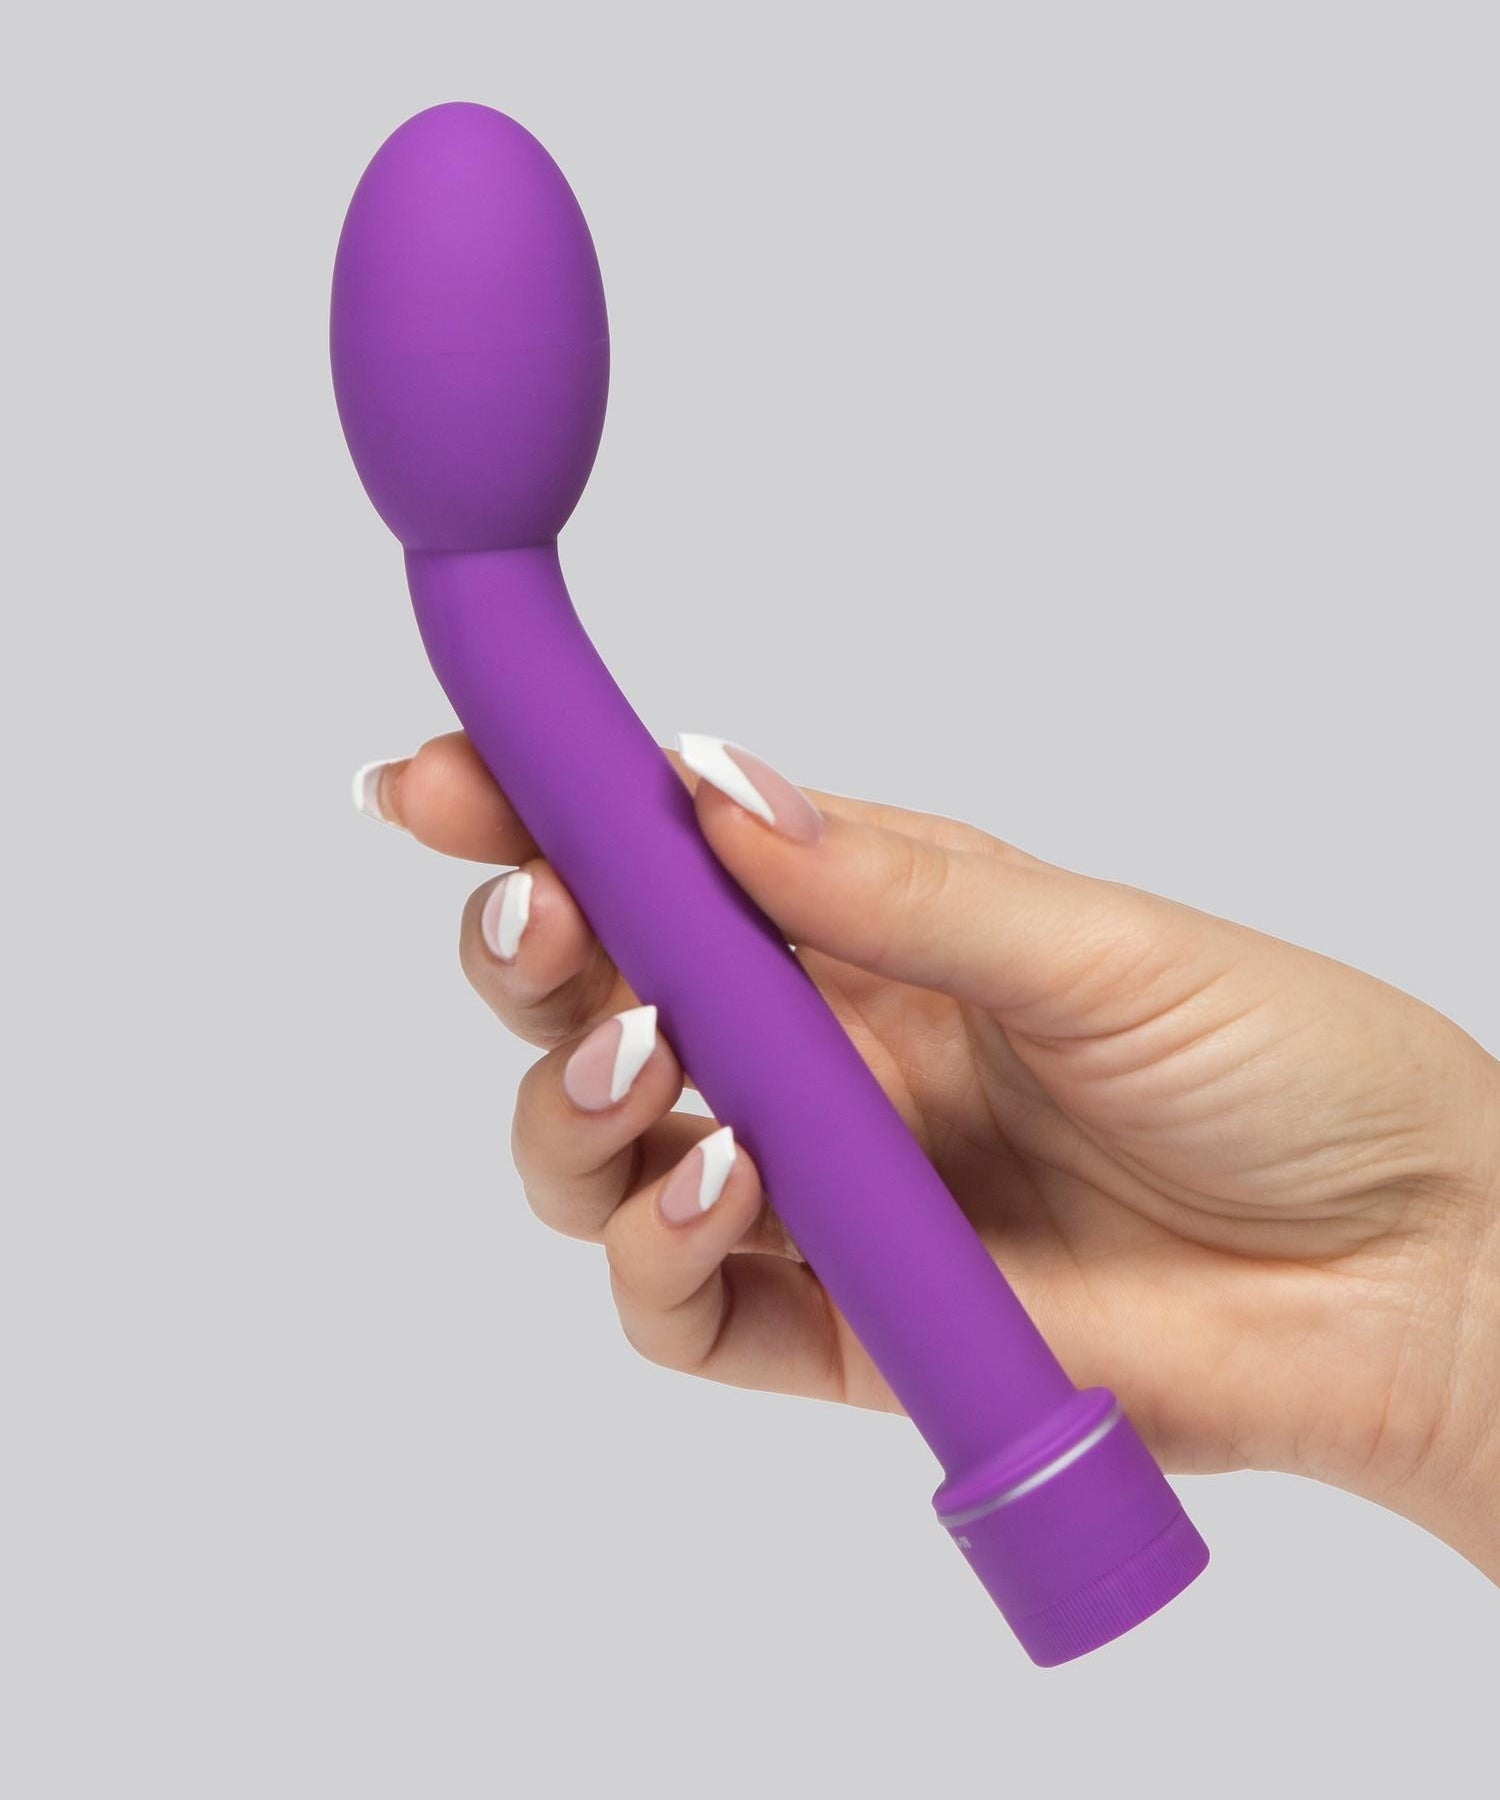 A hand holding the purple curved wand with bulbous tip